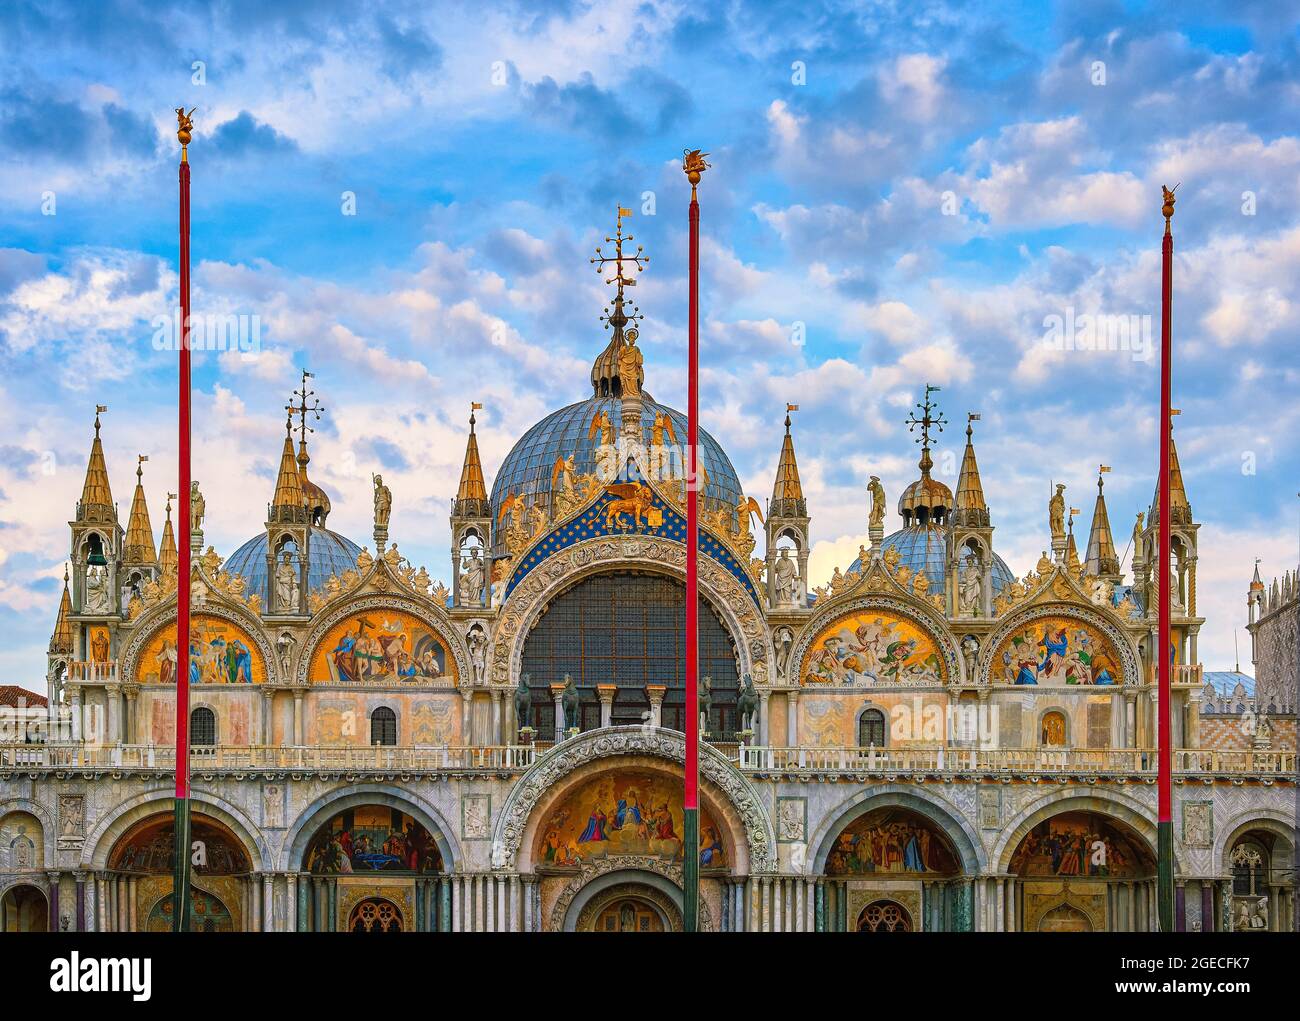 Main facade of St Mark's cathedral, Venice. Italy. UNESCO World Heritage city, blue sky and clouds. Decorations, mosaics, marble carvings, statues. Stock Photo